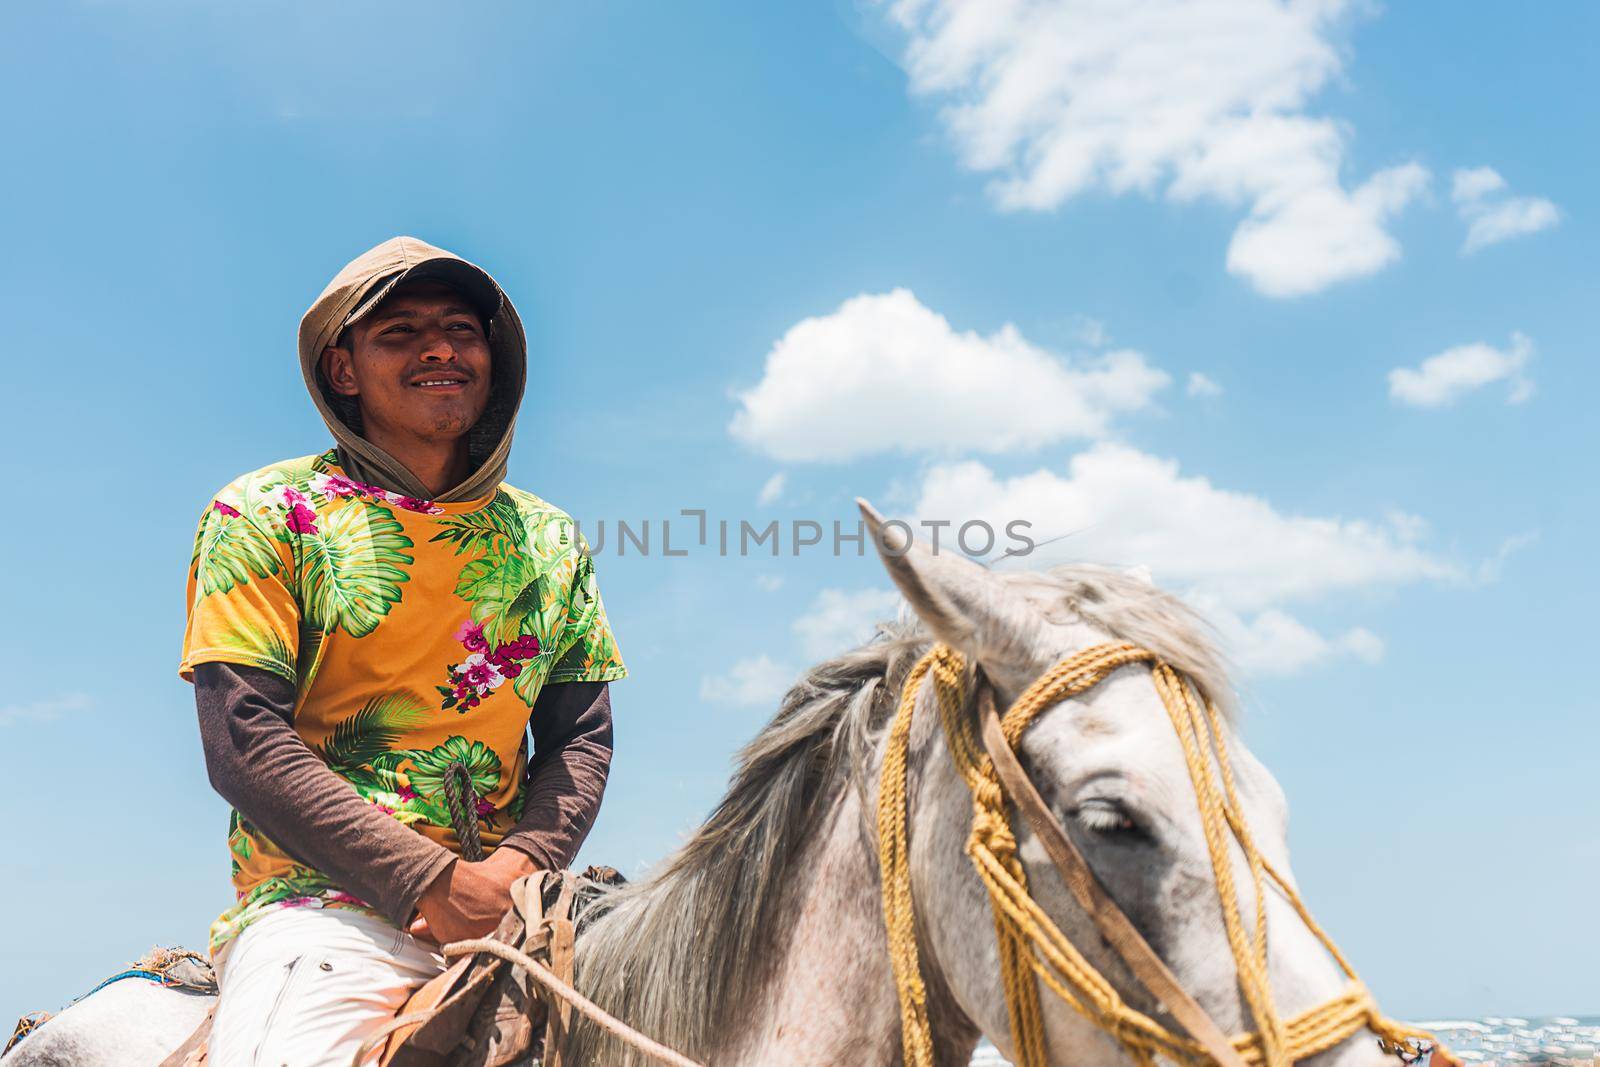 Nicaraguan Latin man with a hood and a flowered shirt riding a horse on the beach in Masachapa, Nicaragua. Concept of freedom and self-improvement.